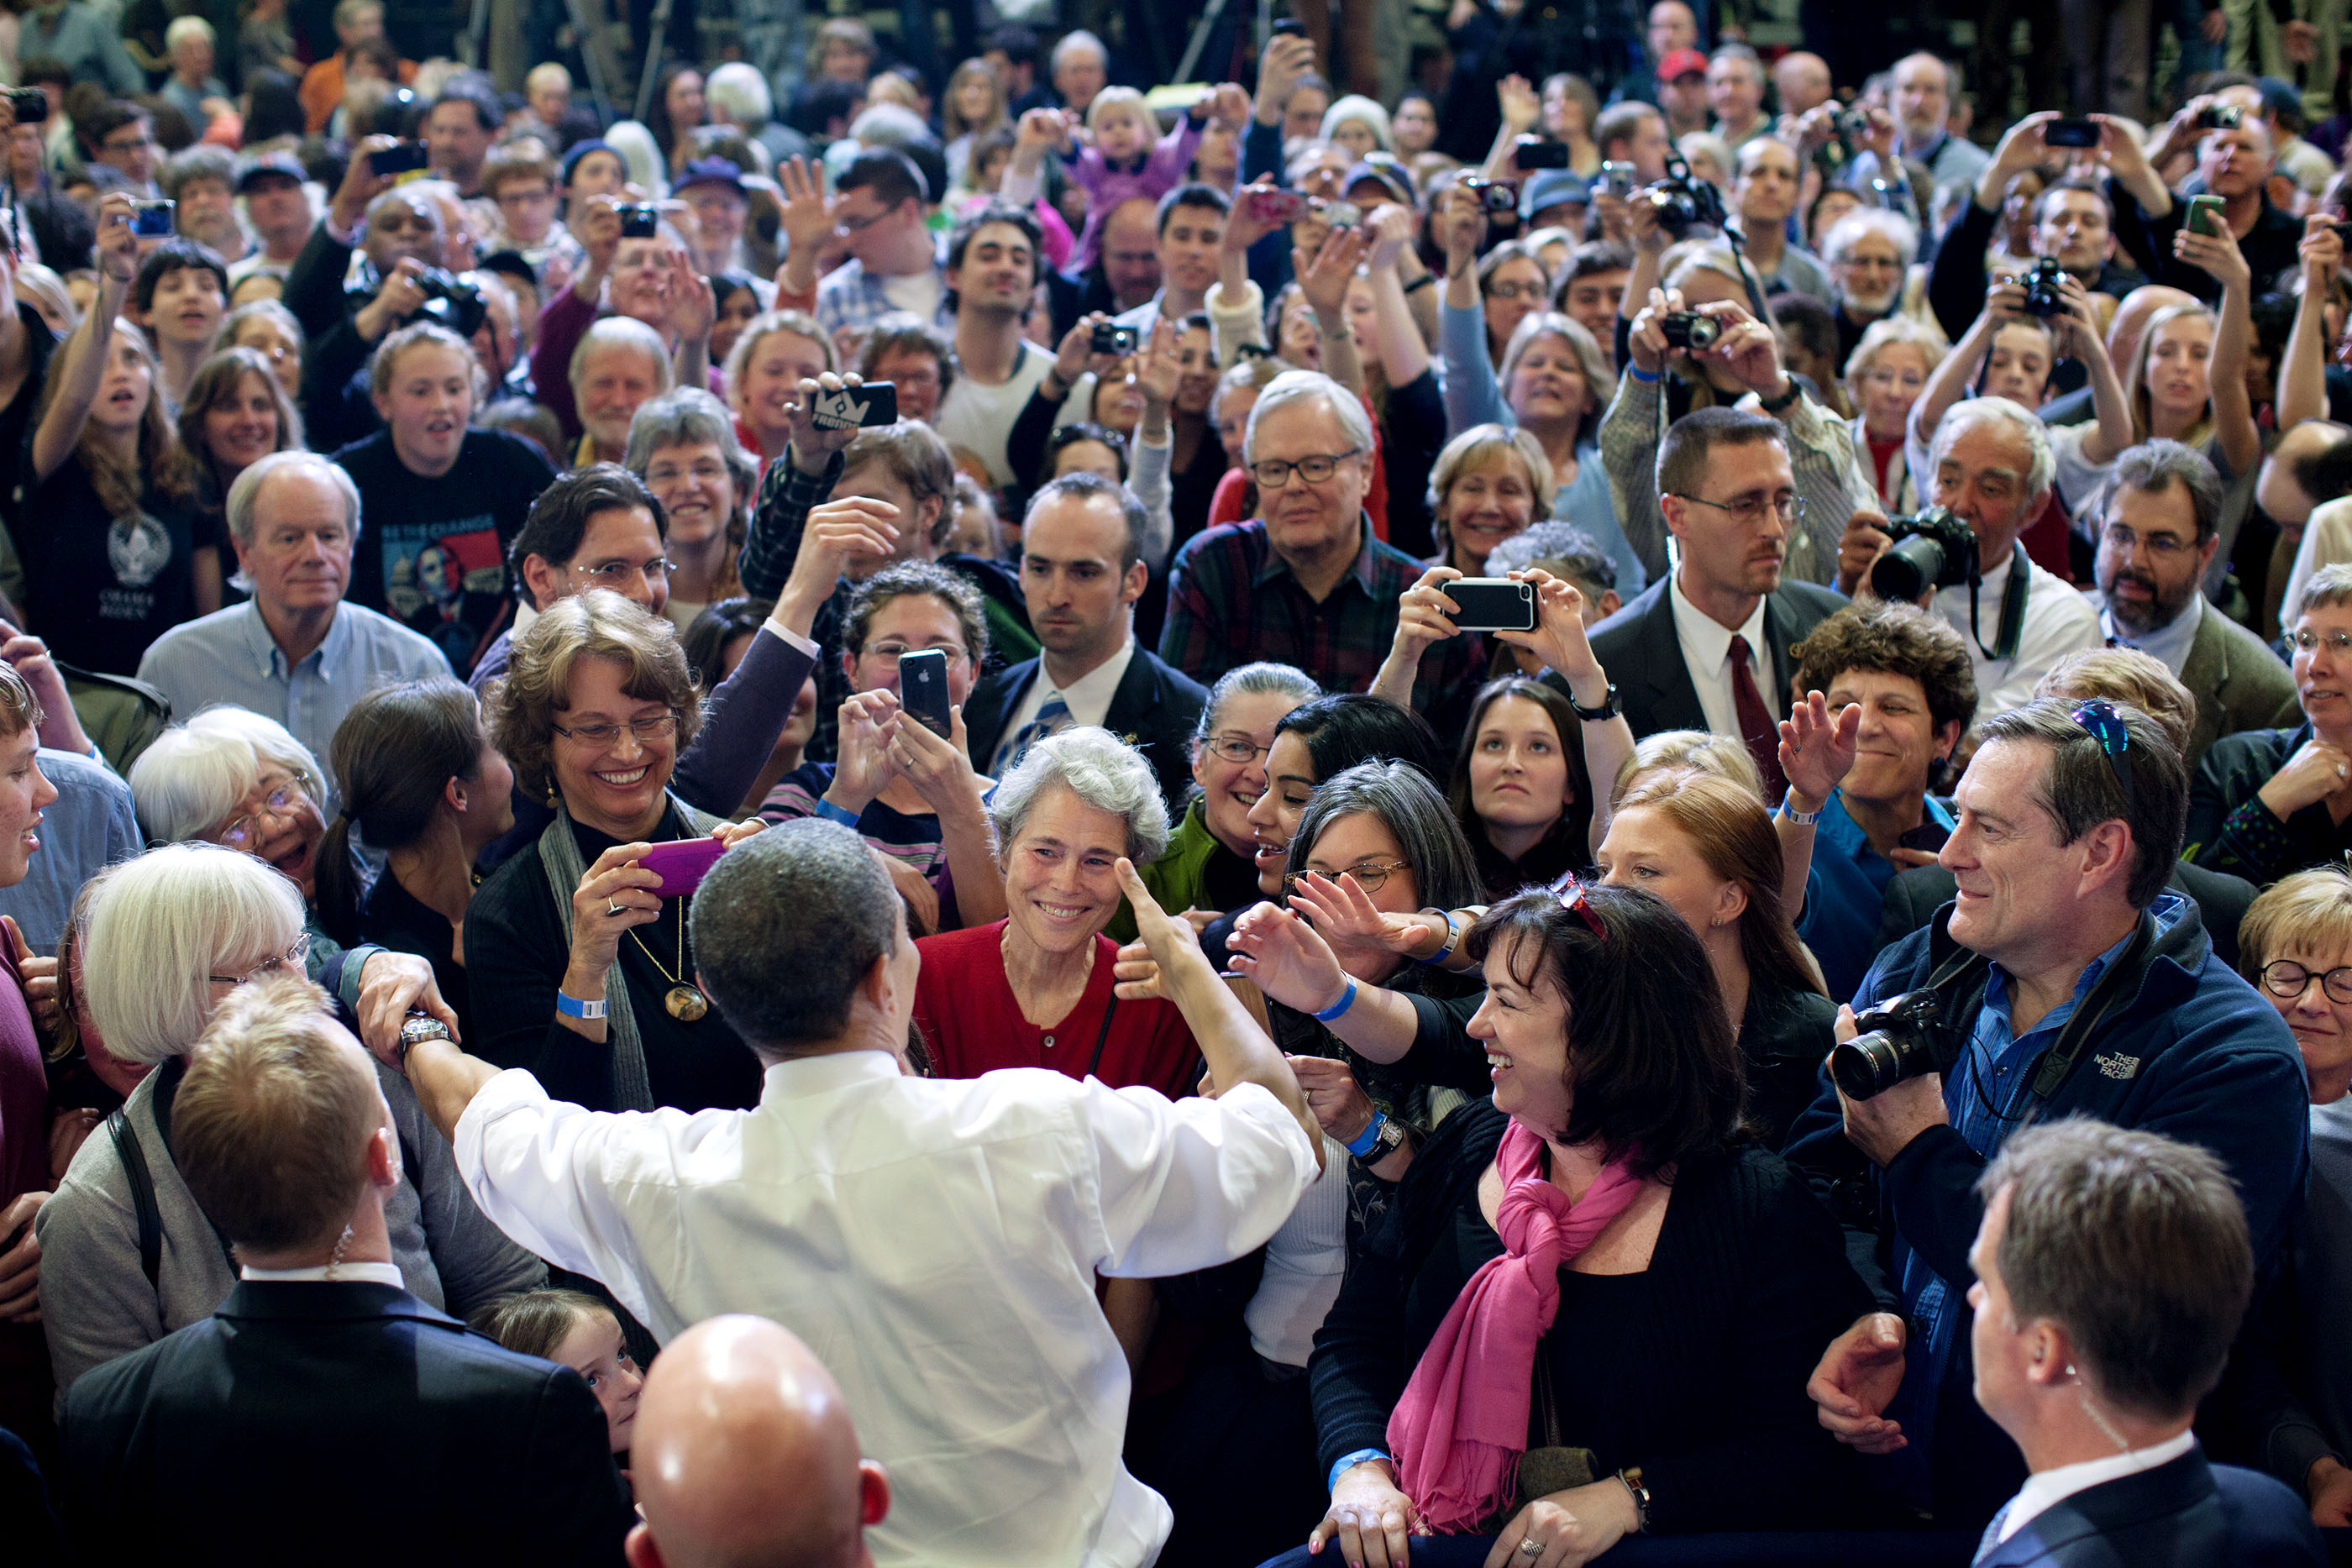 Vermont, March 30, 2012. Greeting the crowd in Burlington. (Official White House Photo by Pete Souza)